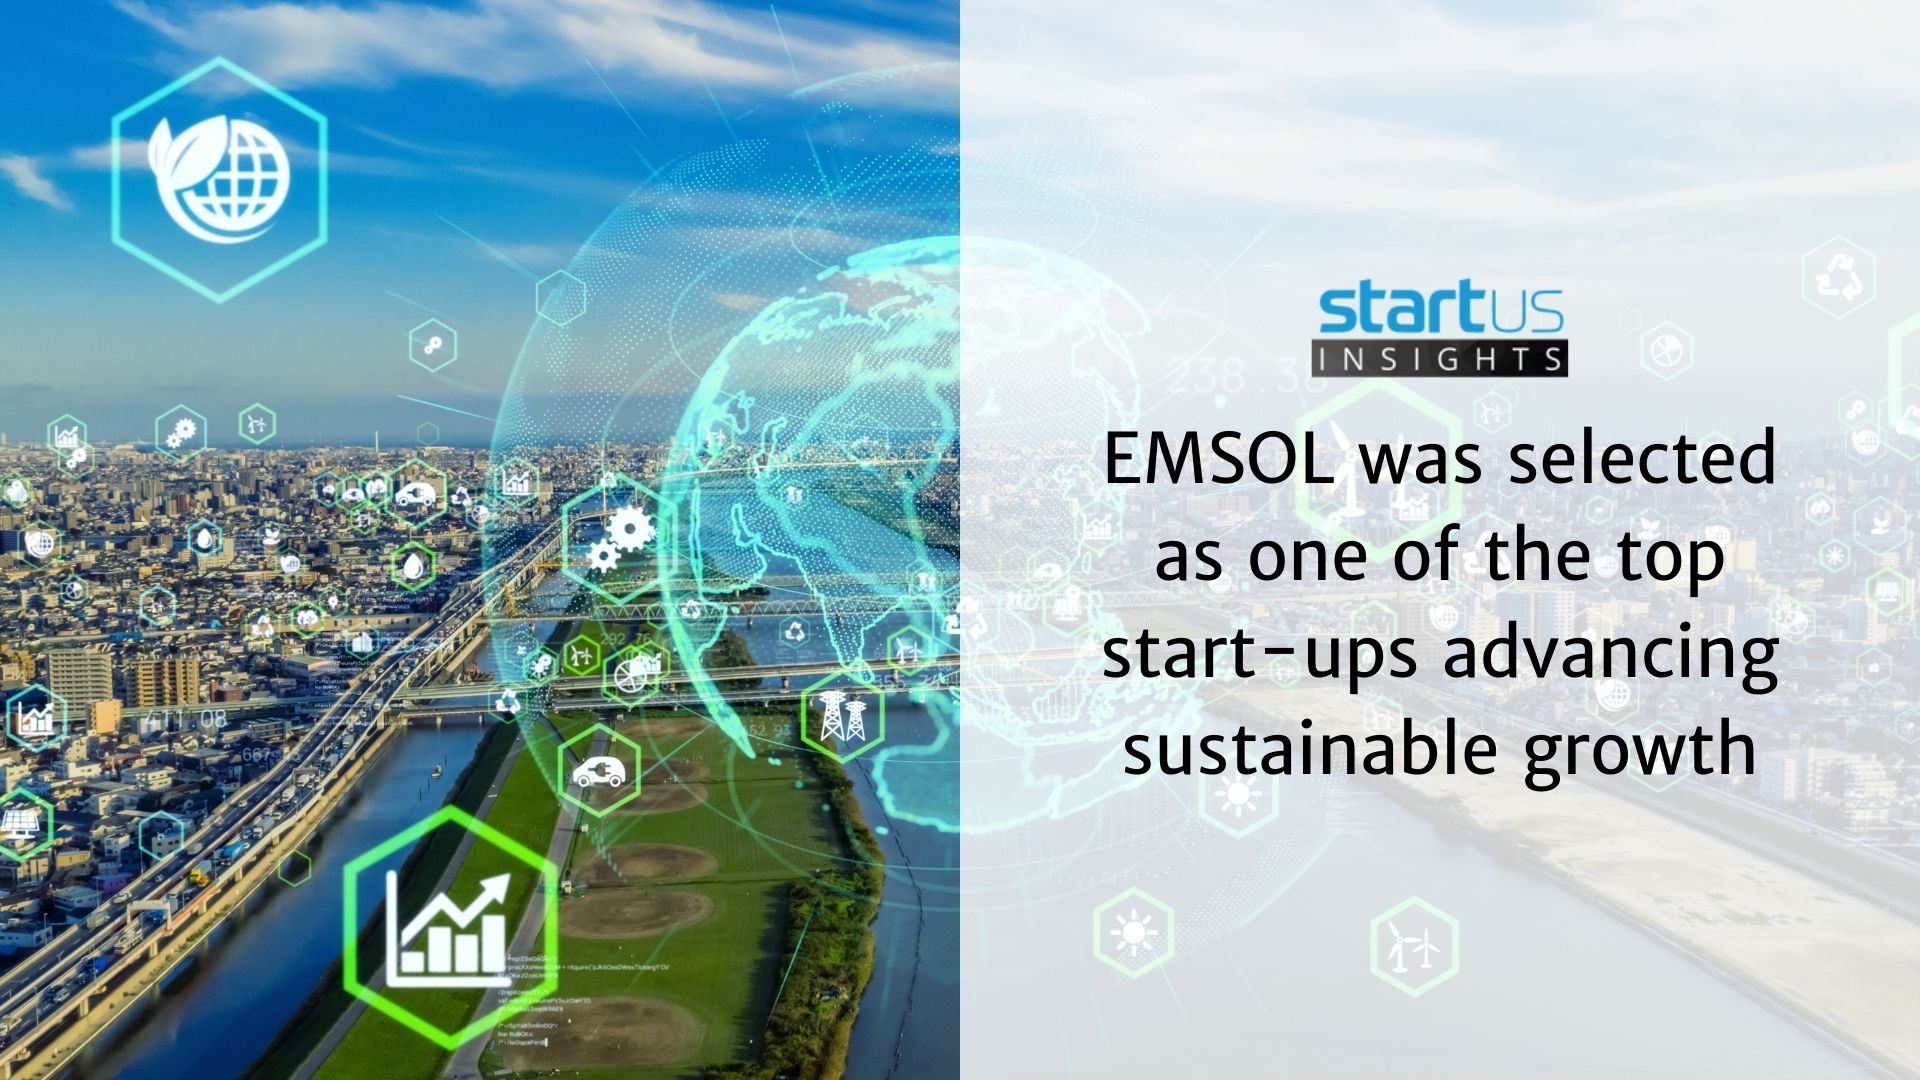 EMSOL was selected as one of the top start-ups advancing sustainable growth